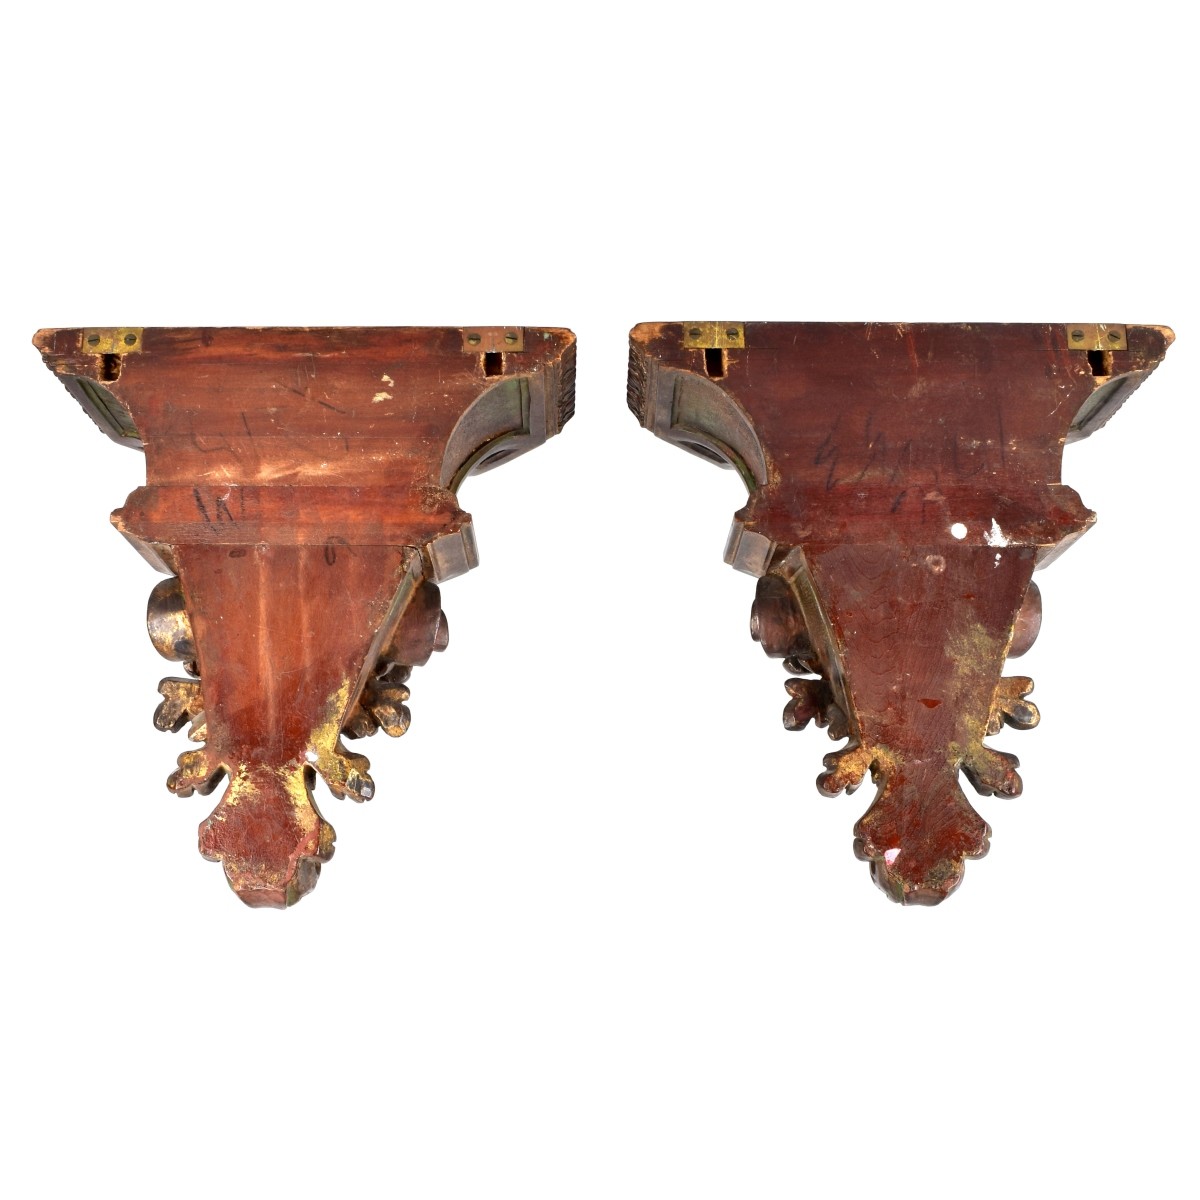 Pair of Carved Wood Wall Brackets